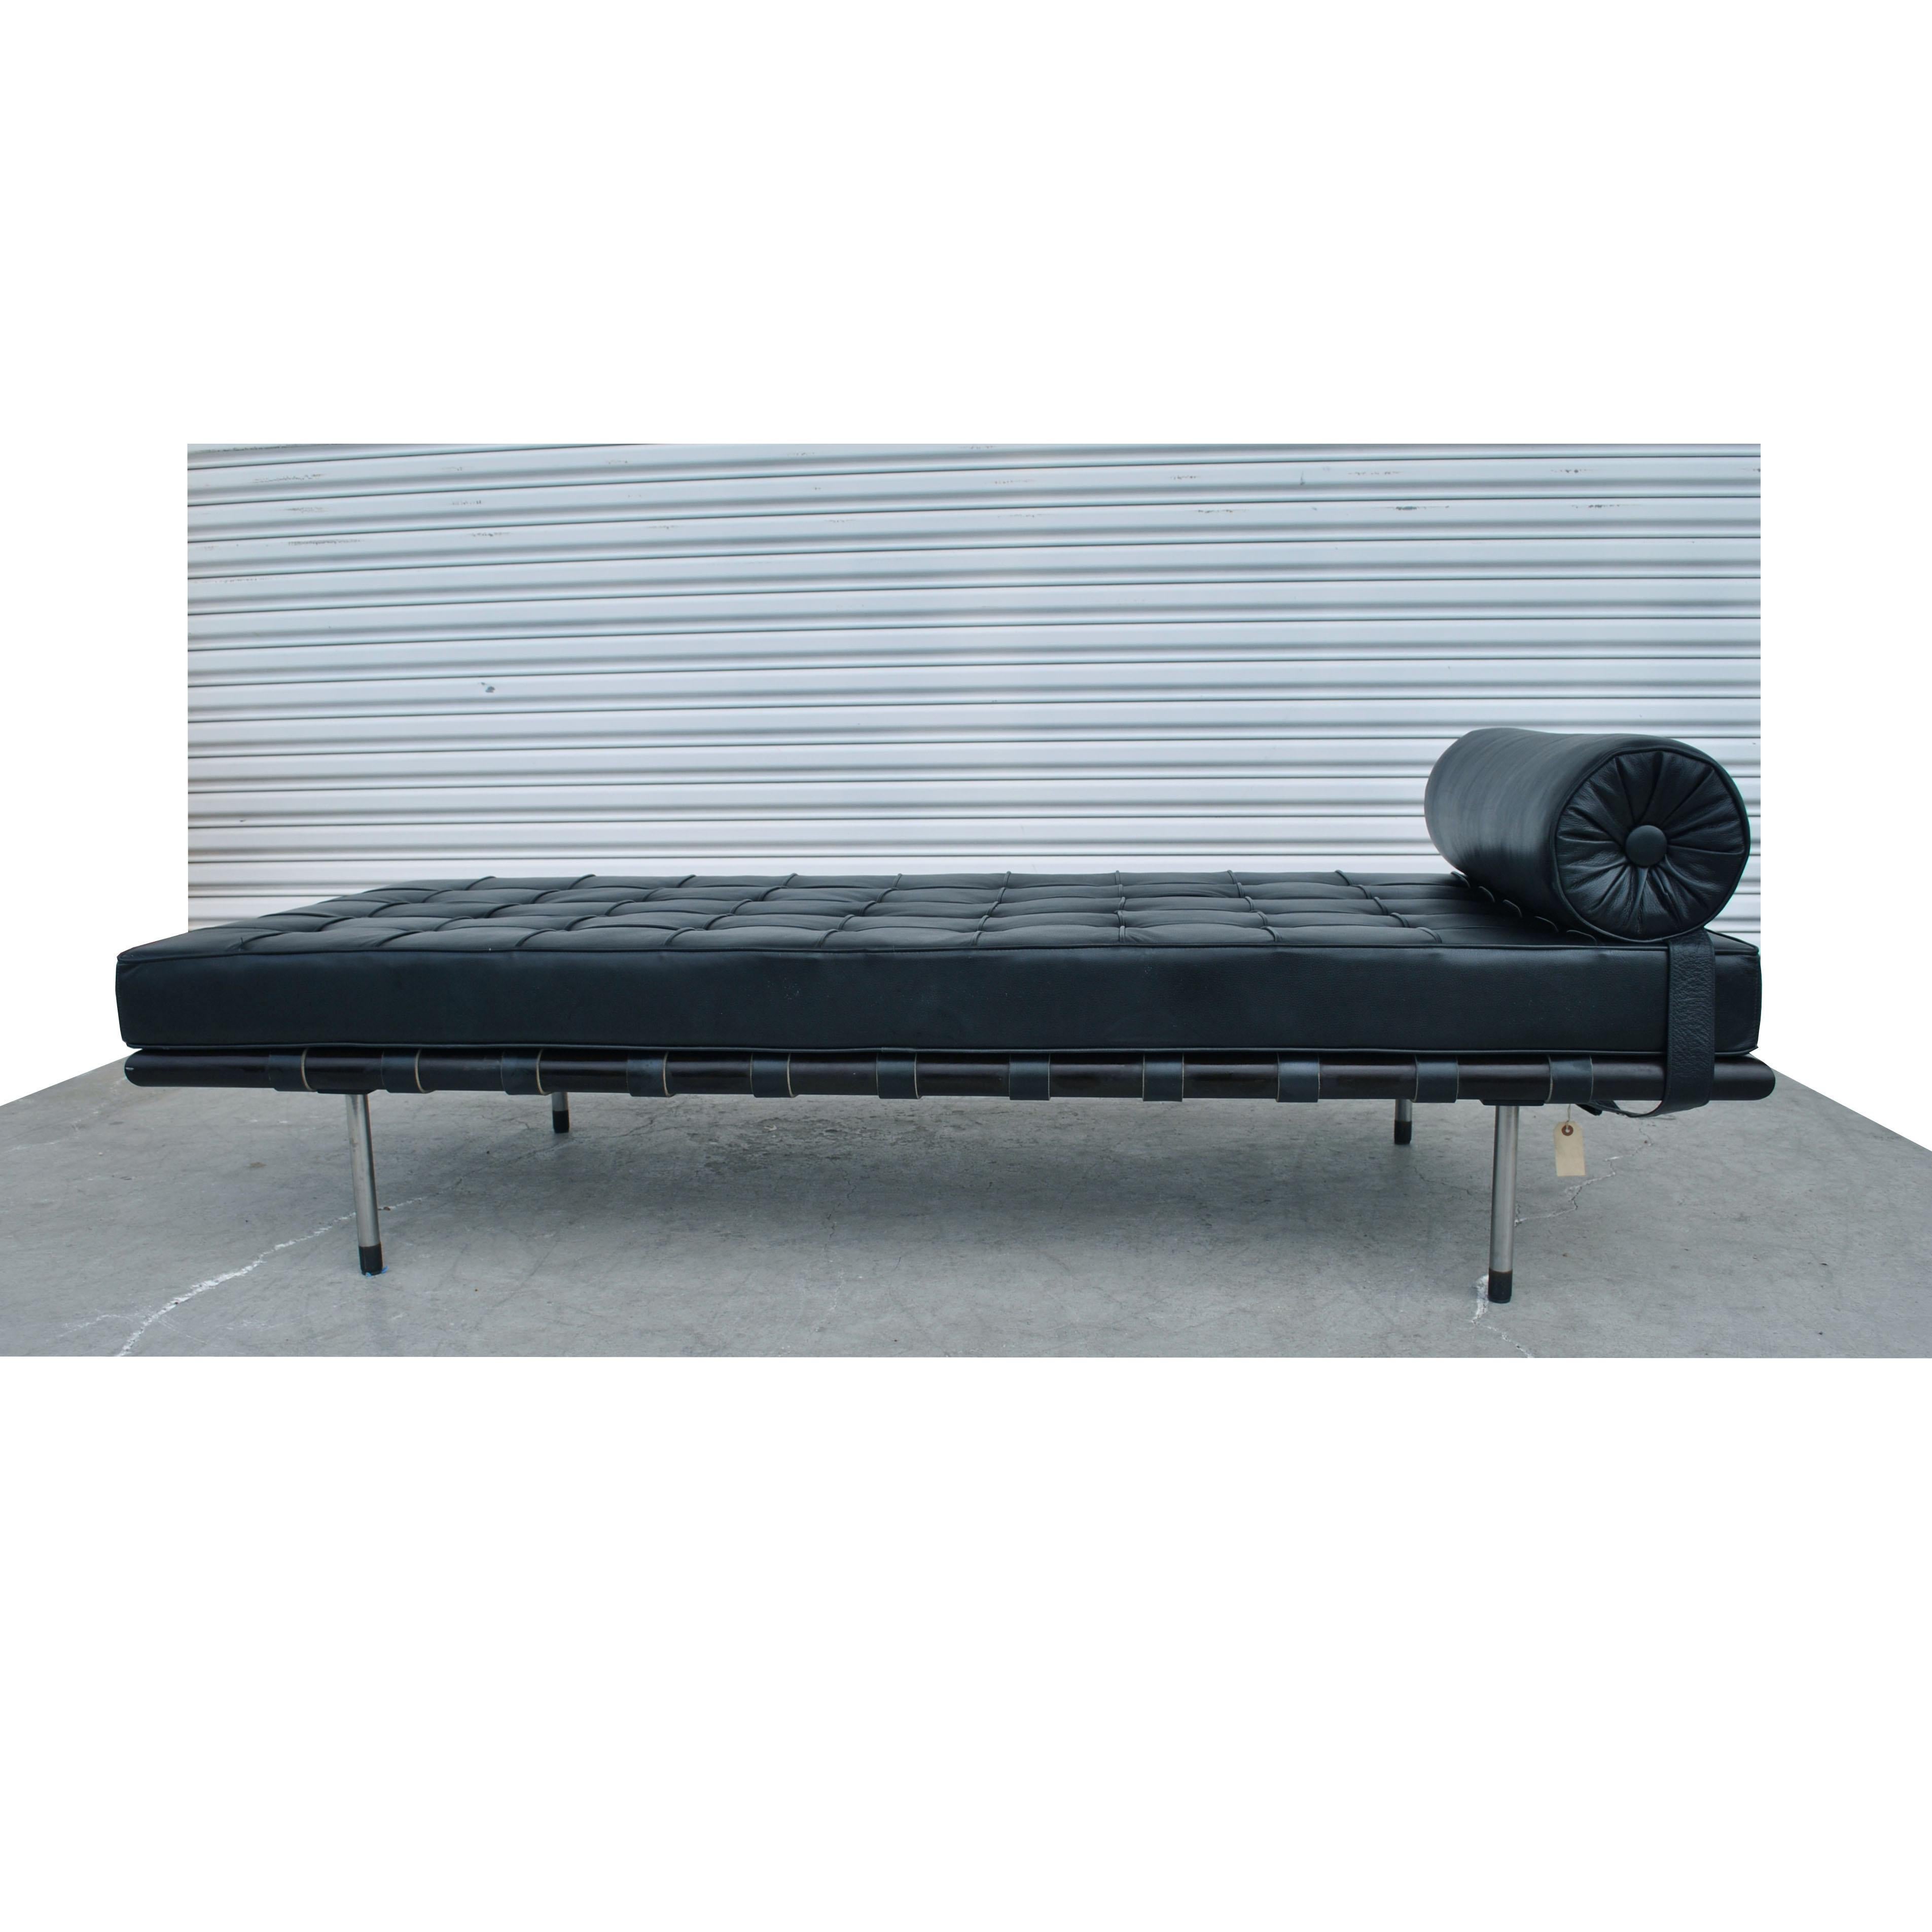 Artisan

Mies van der Rohe

Mies van der Rohe daybed 


Features: 
Walnut frame
Premium aniline dyed Italian black leather from brazil
Individually hand welted upholstery panel sections-botton tufted
Seat cushions are high resilient-high